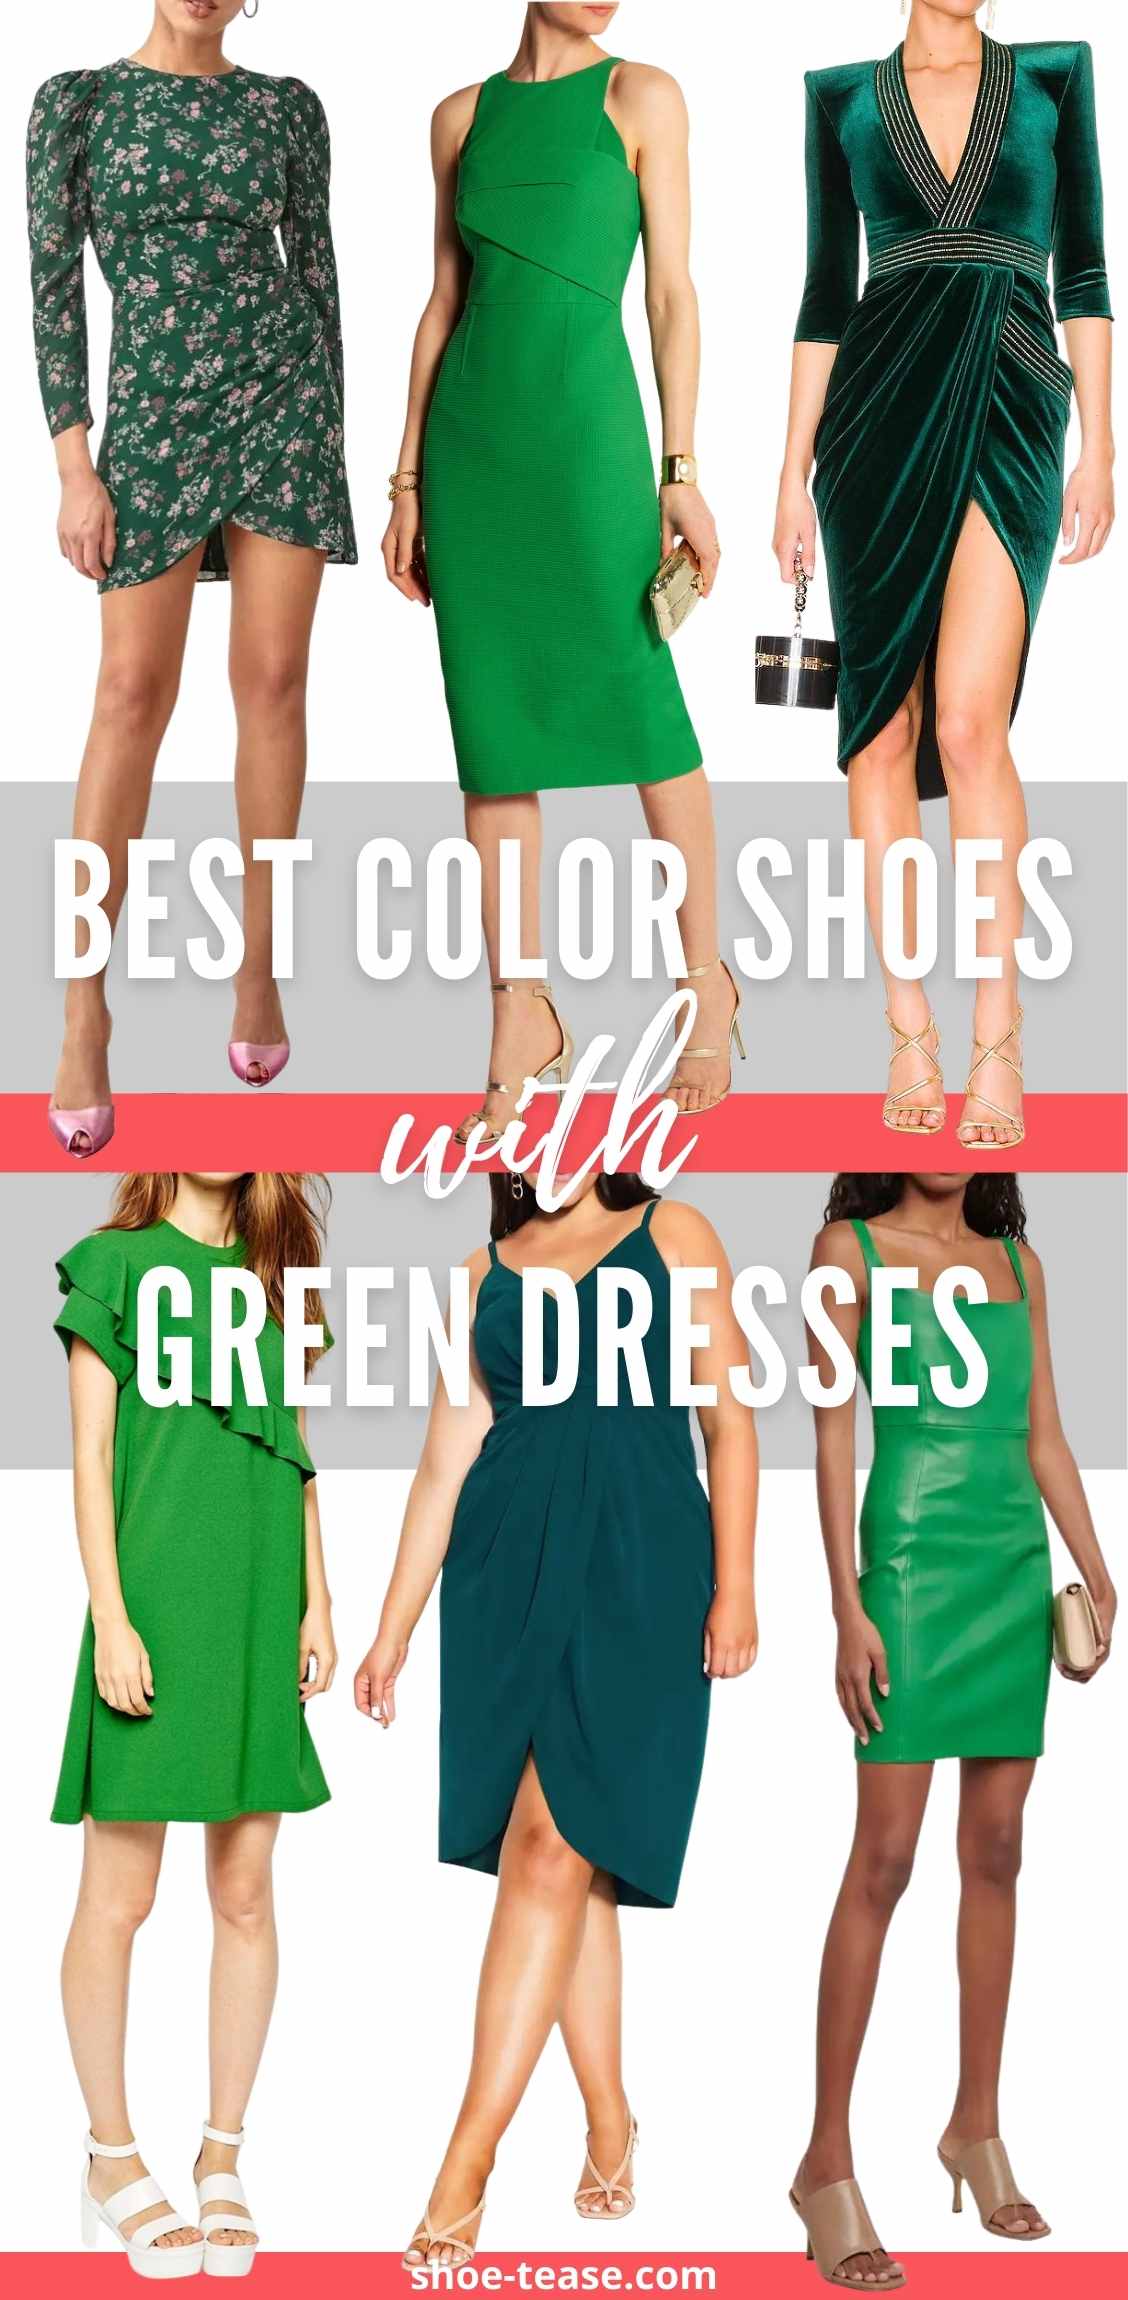 What color shoes to wear with emerald green dress